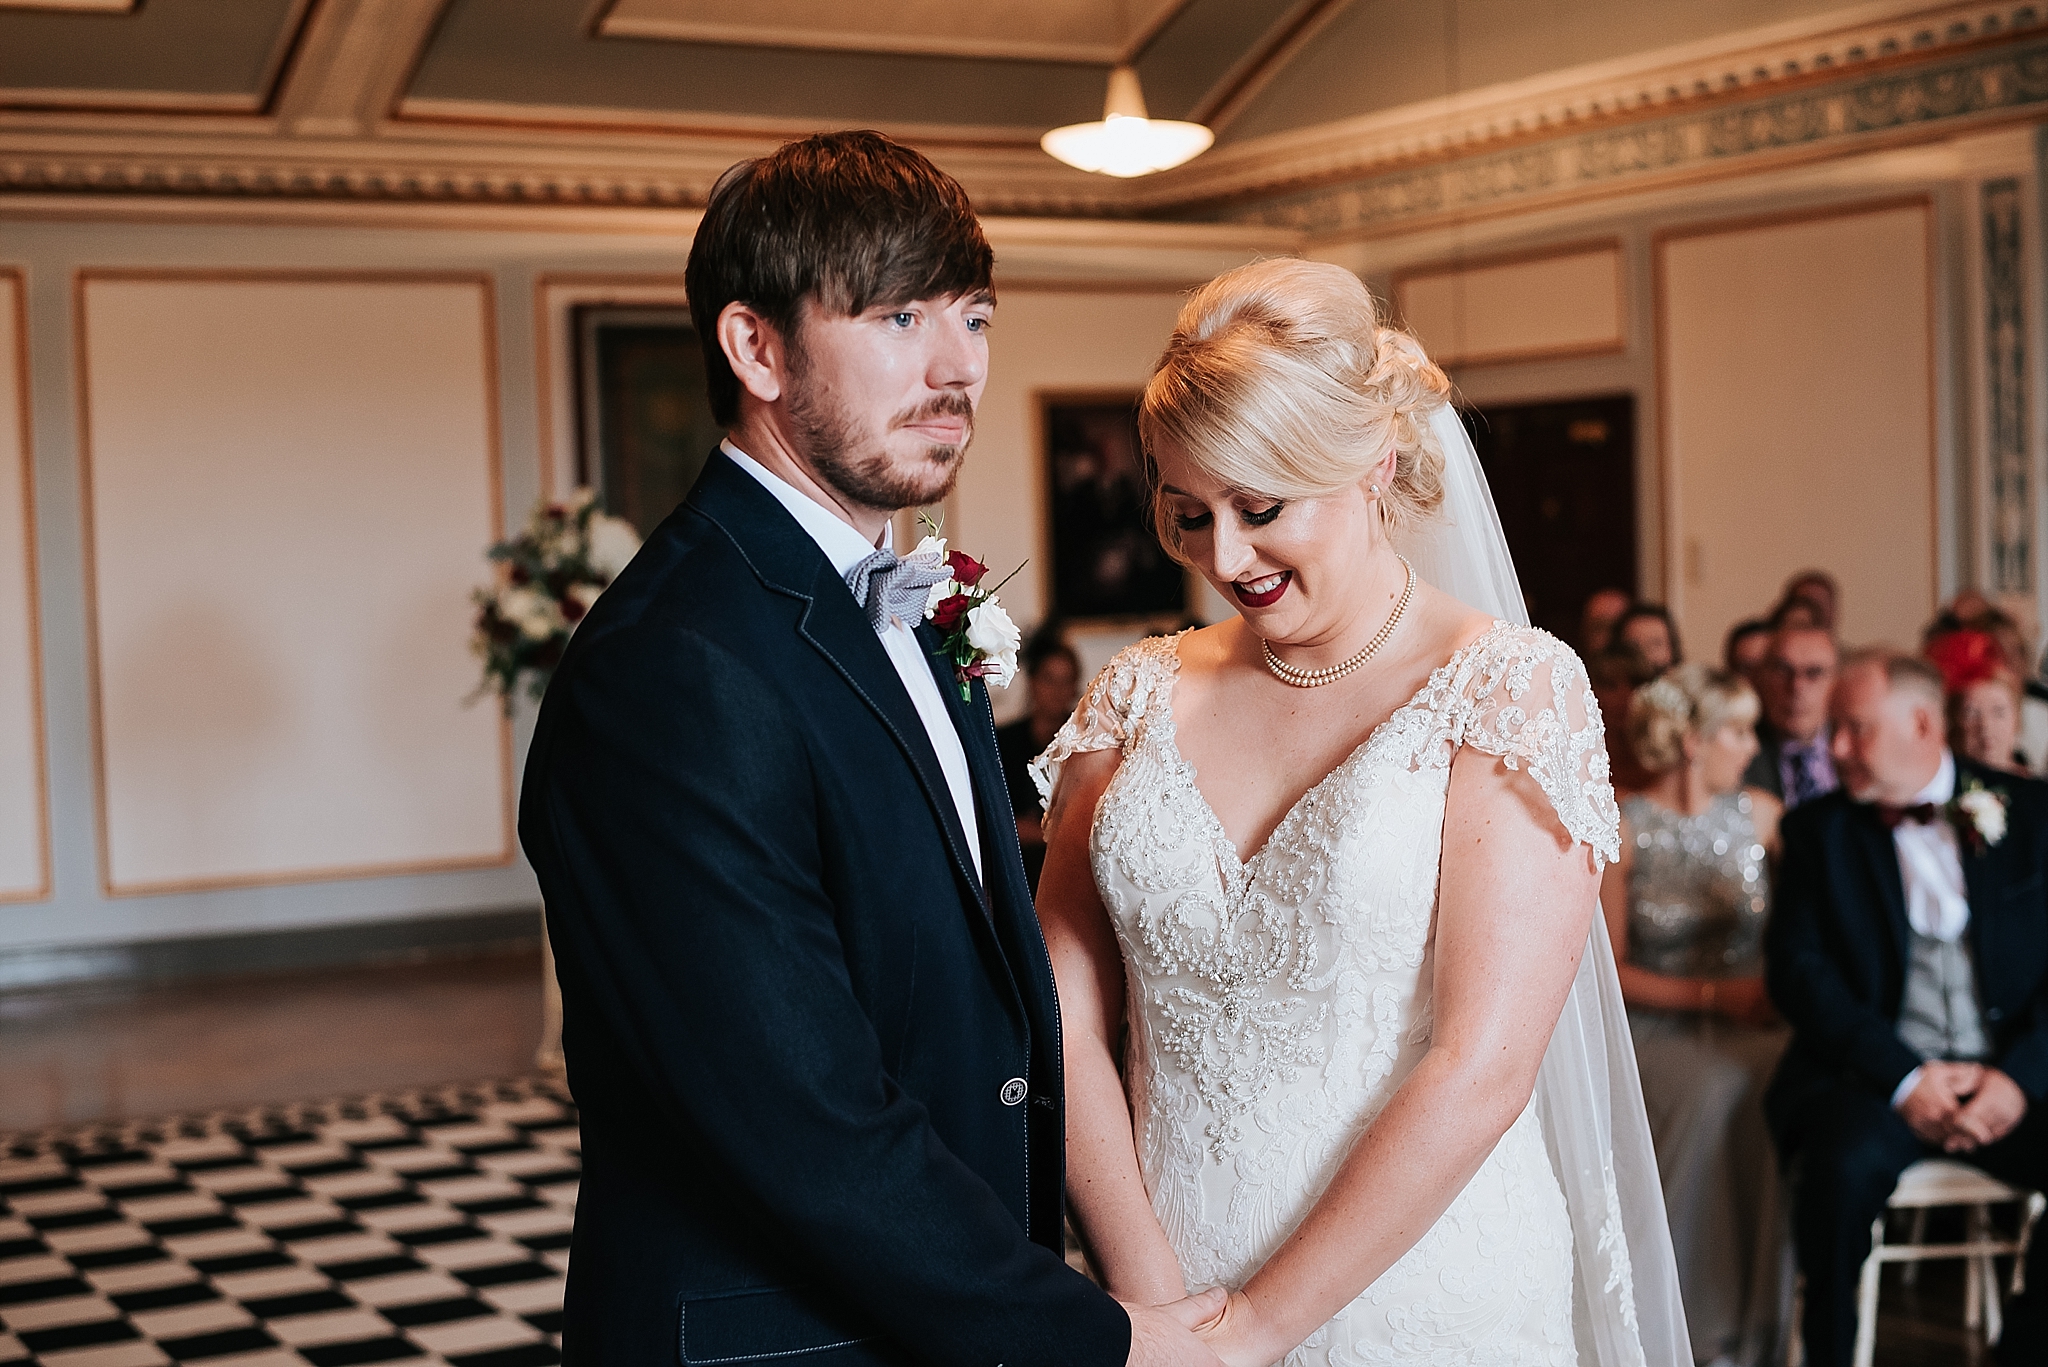 quirky wedding at st annes palace 